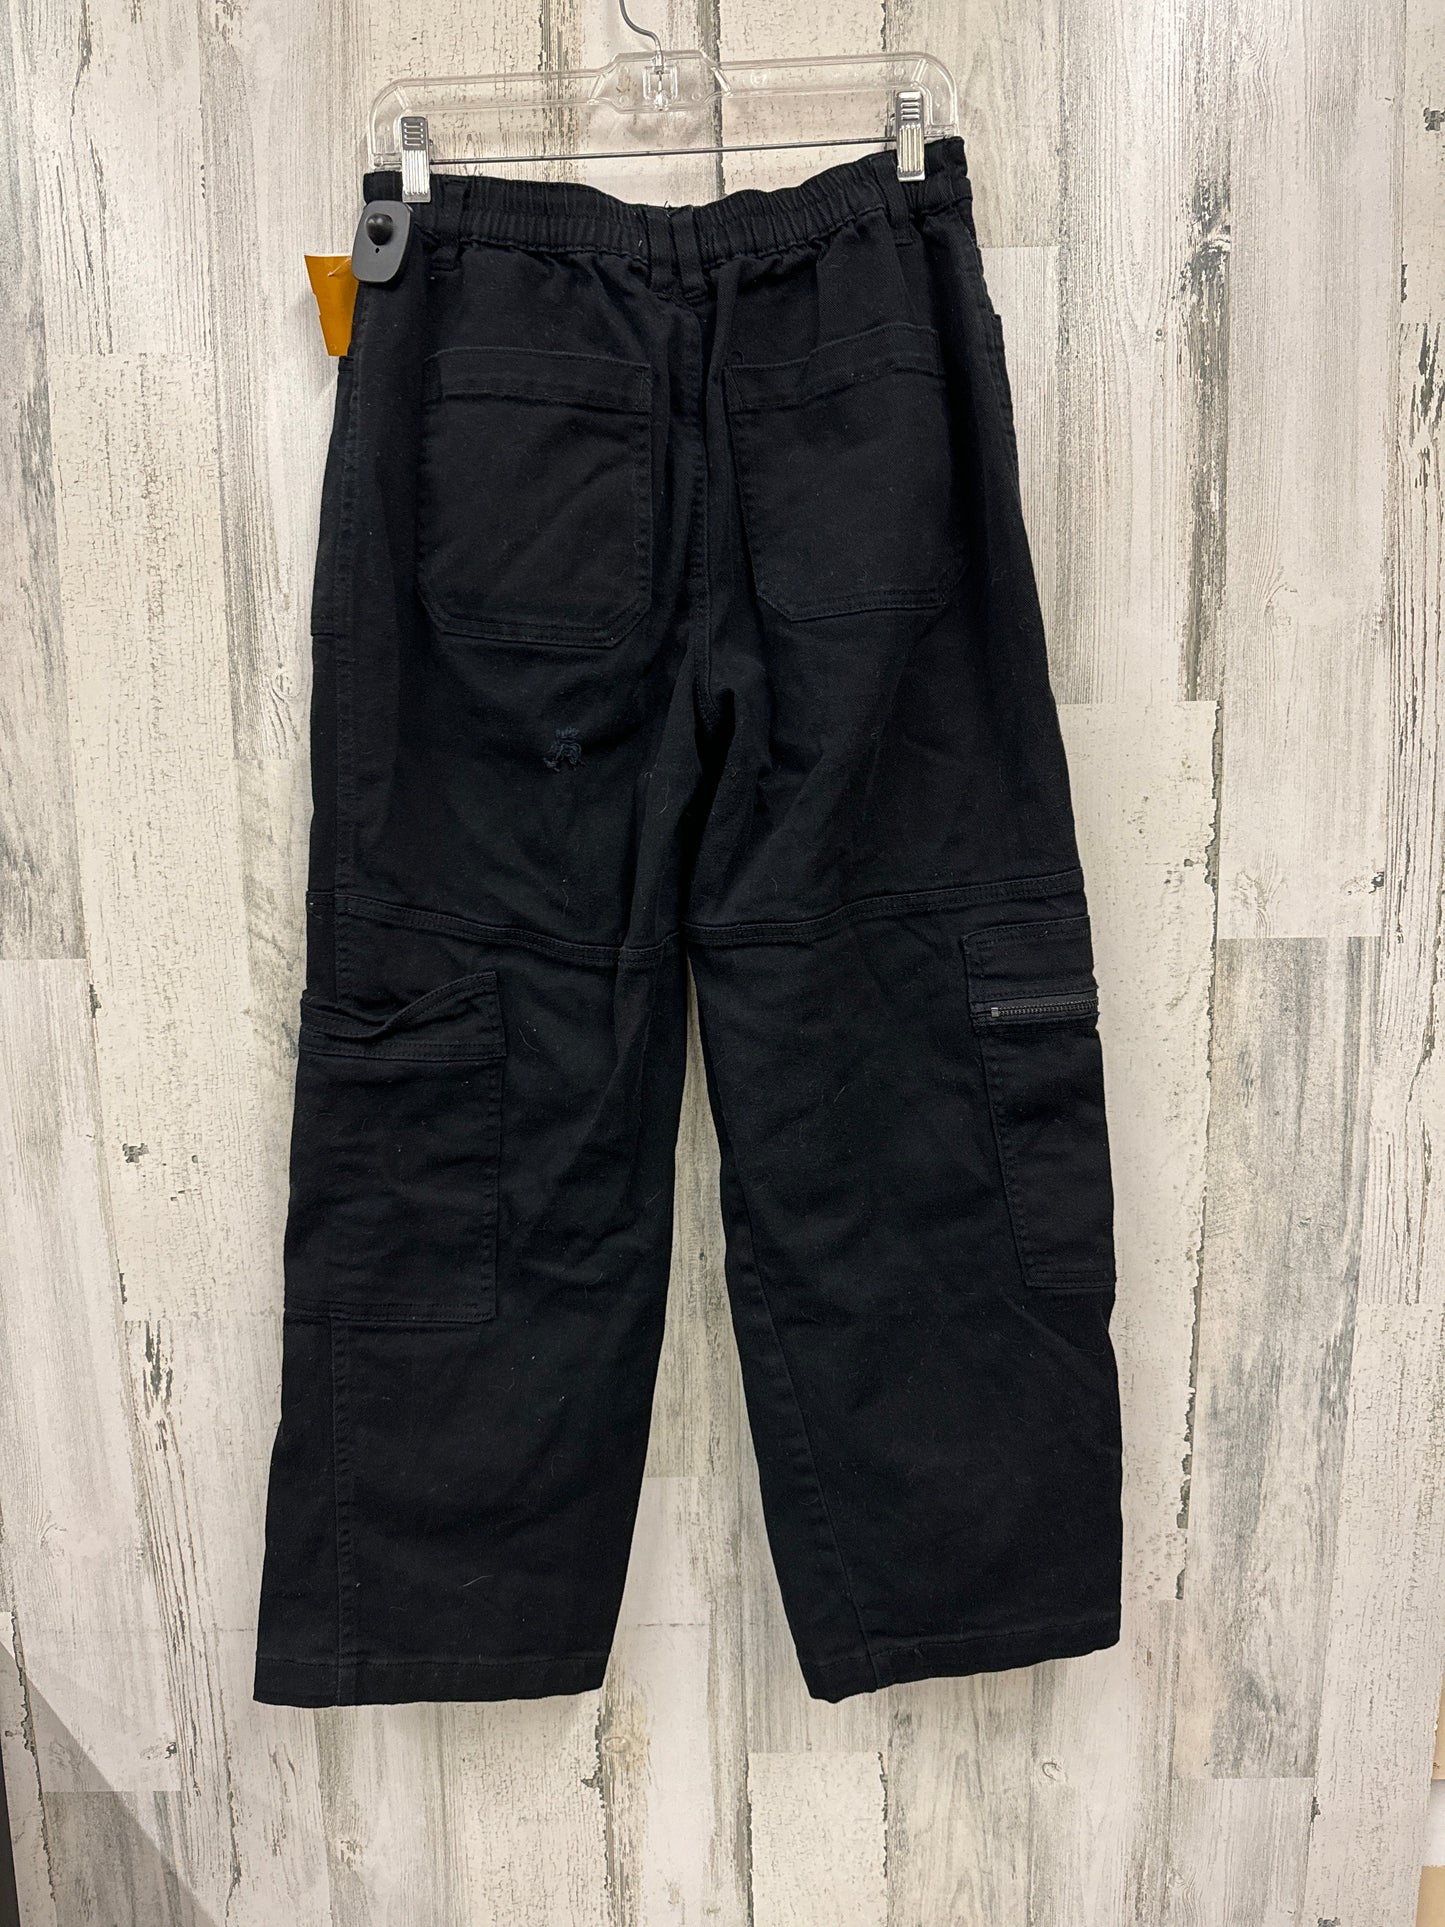 Pants Cargo & Utility By Madden Girl  Size: L